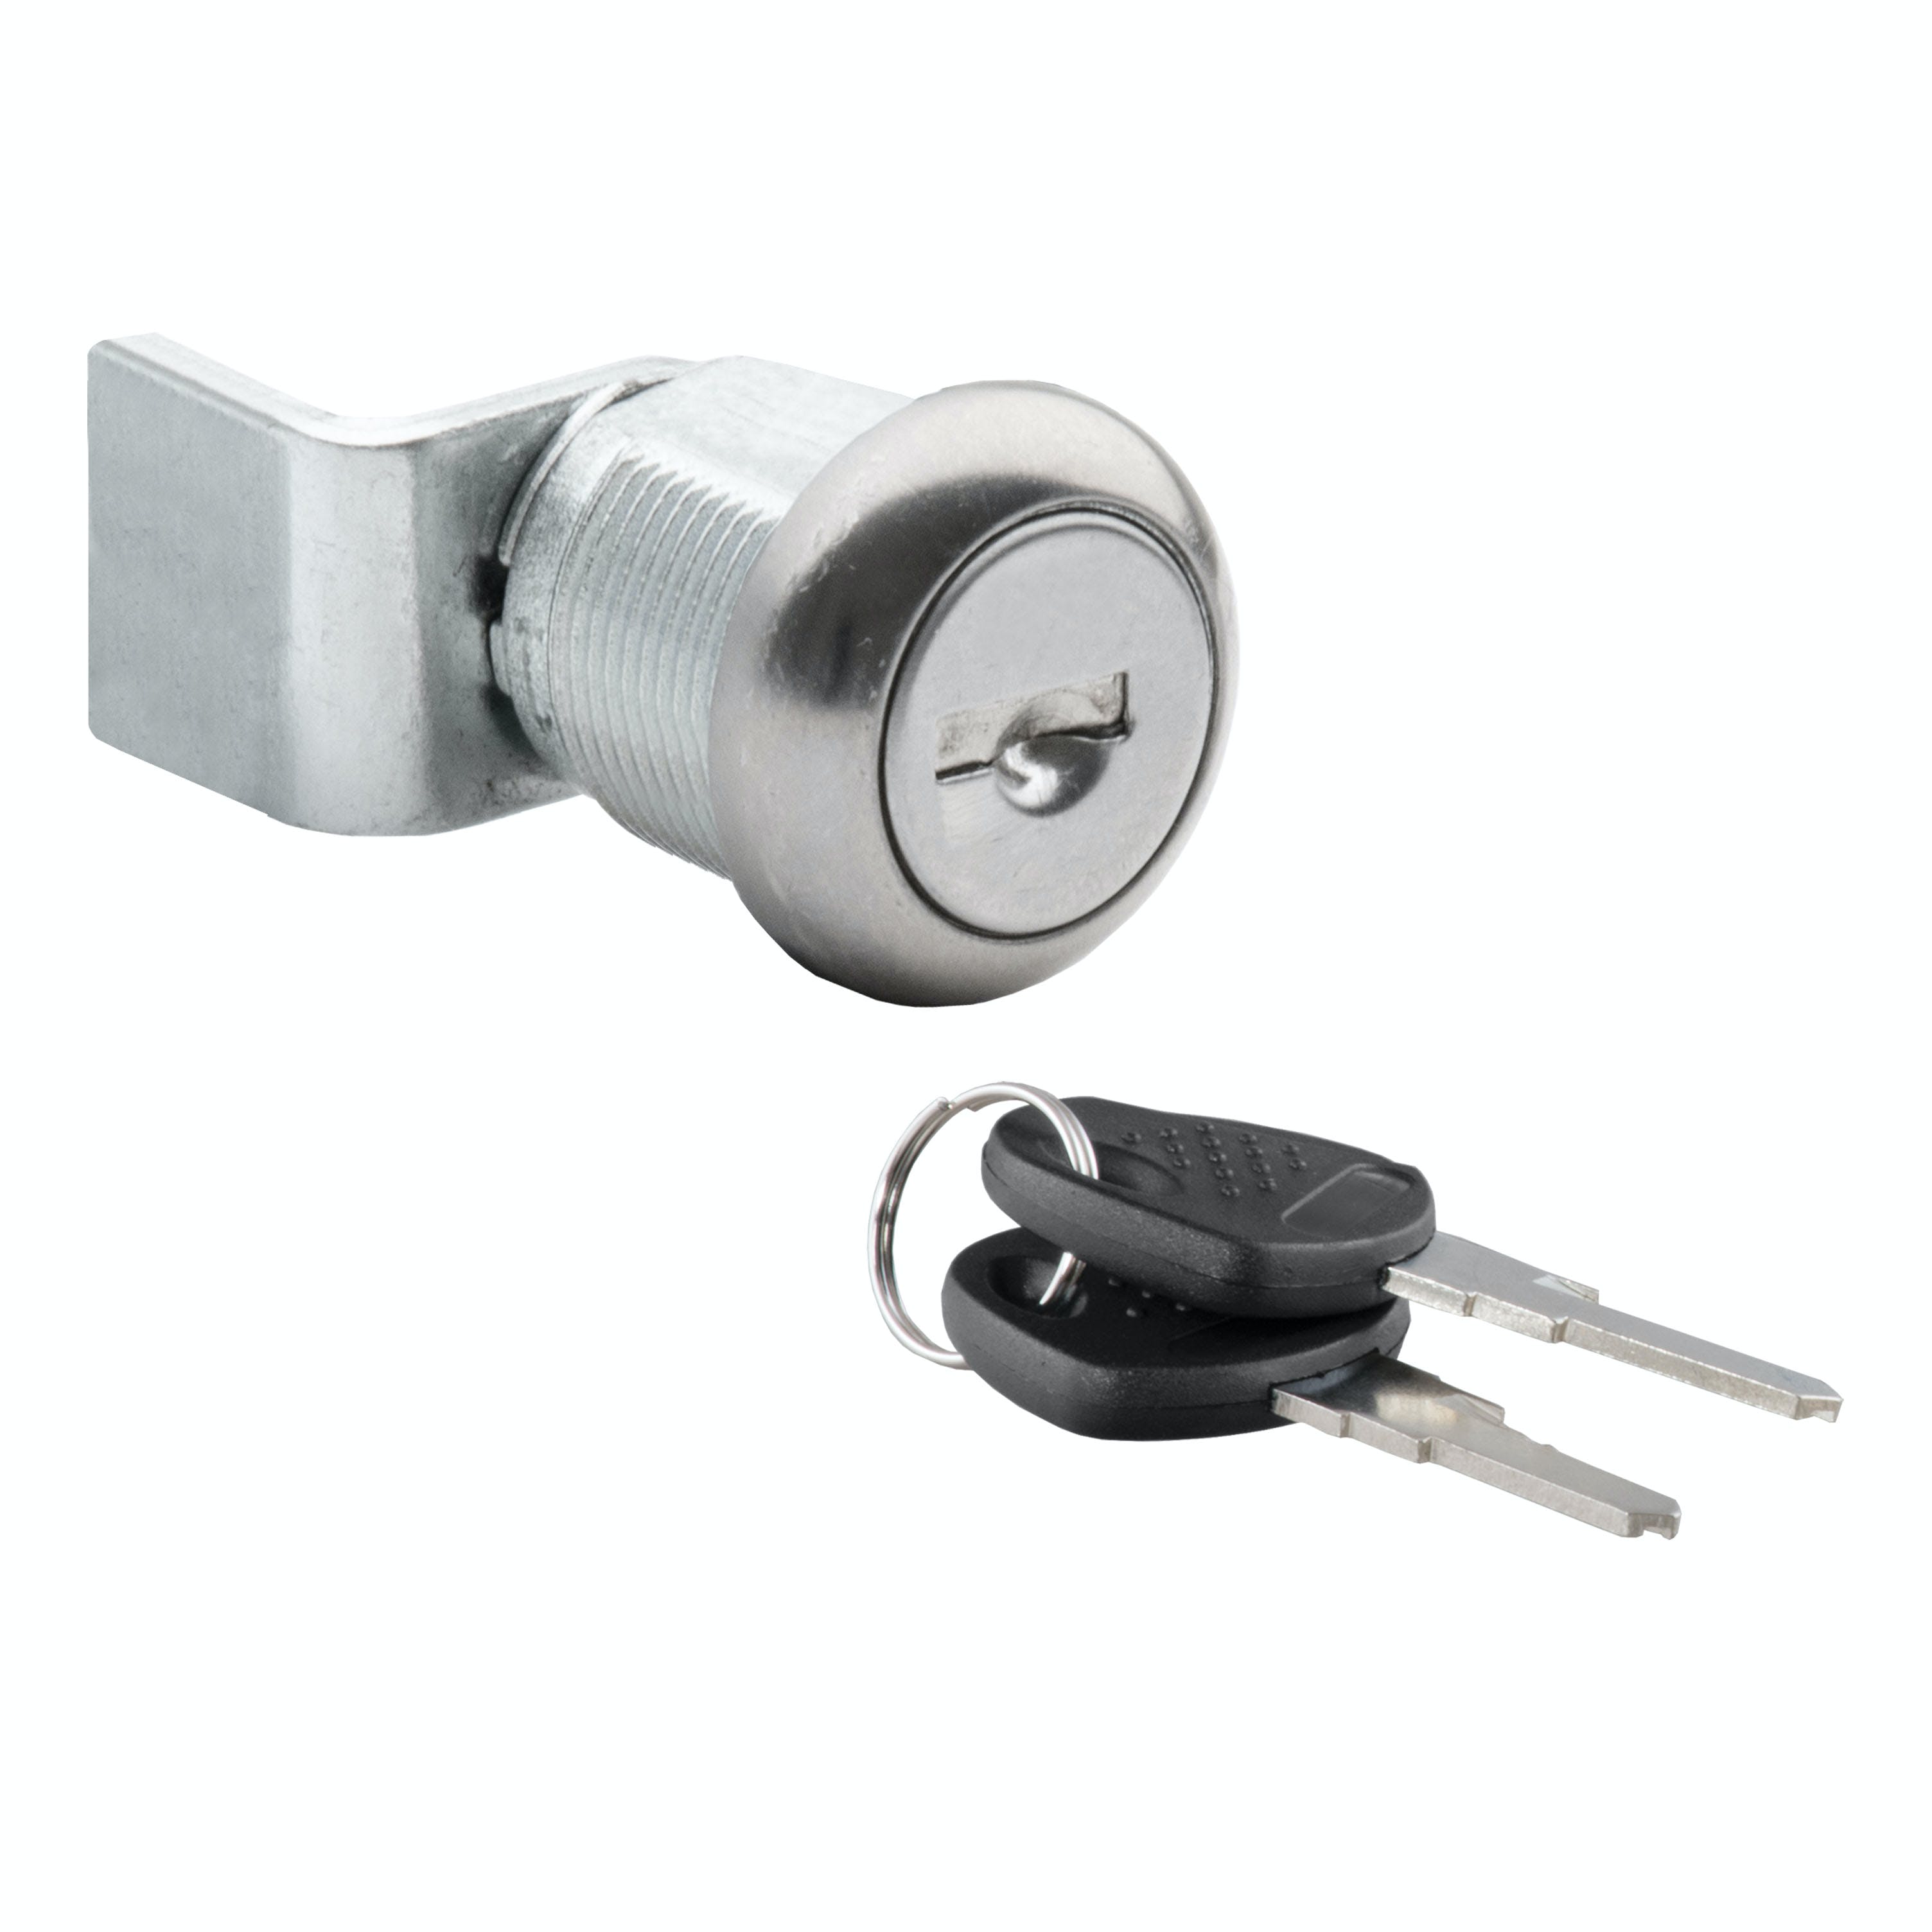 UWS 003-RYTHCY-007 Replacement T-Handle Lock Cylinder and Keys